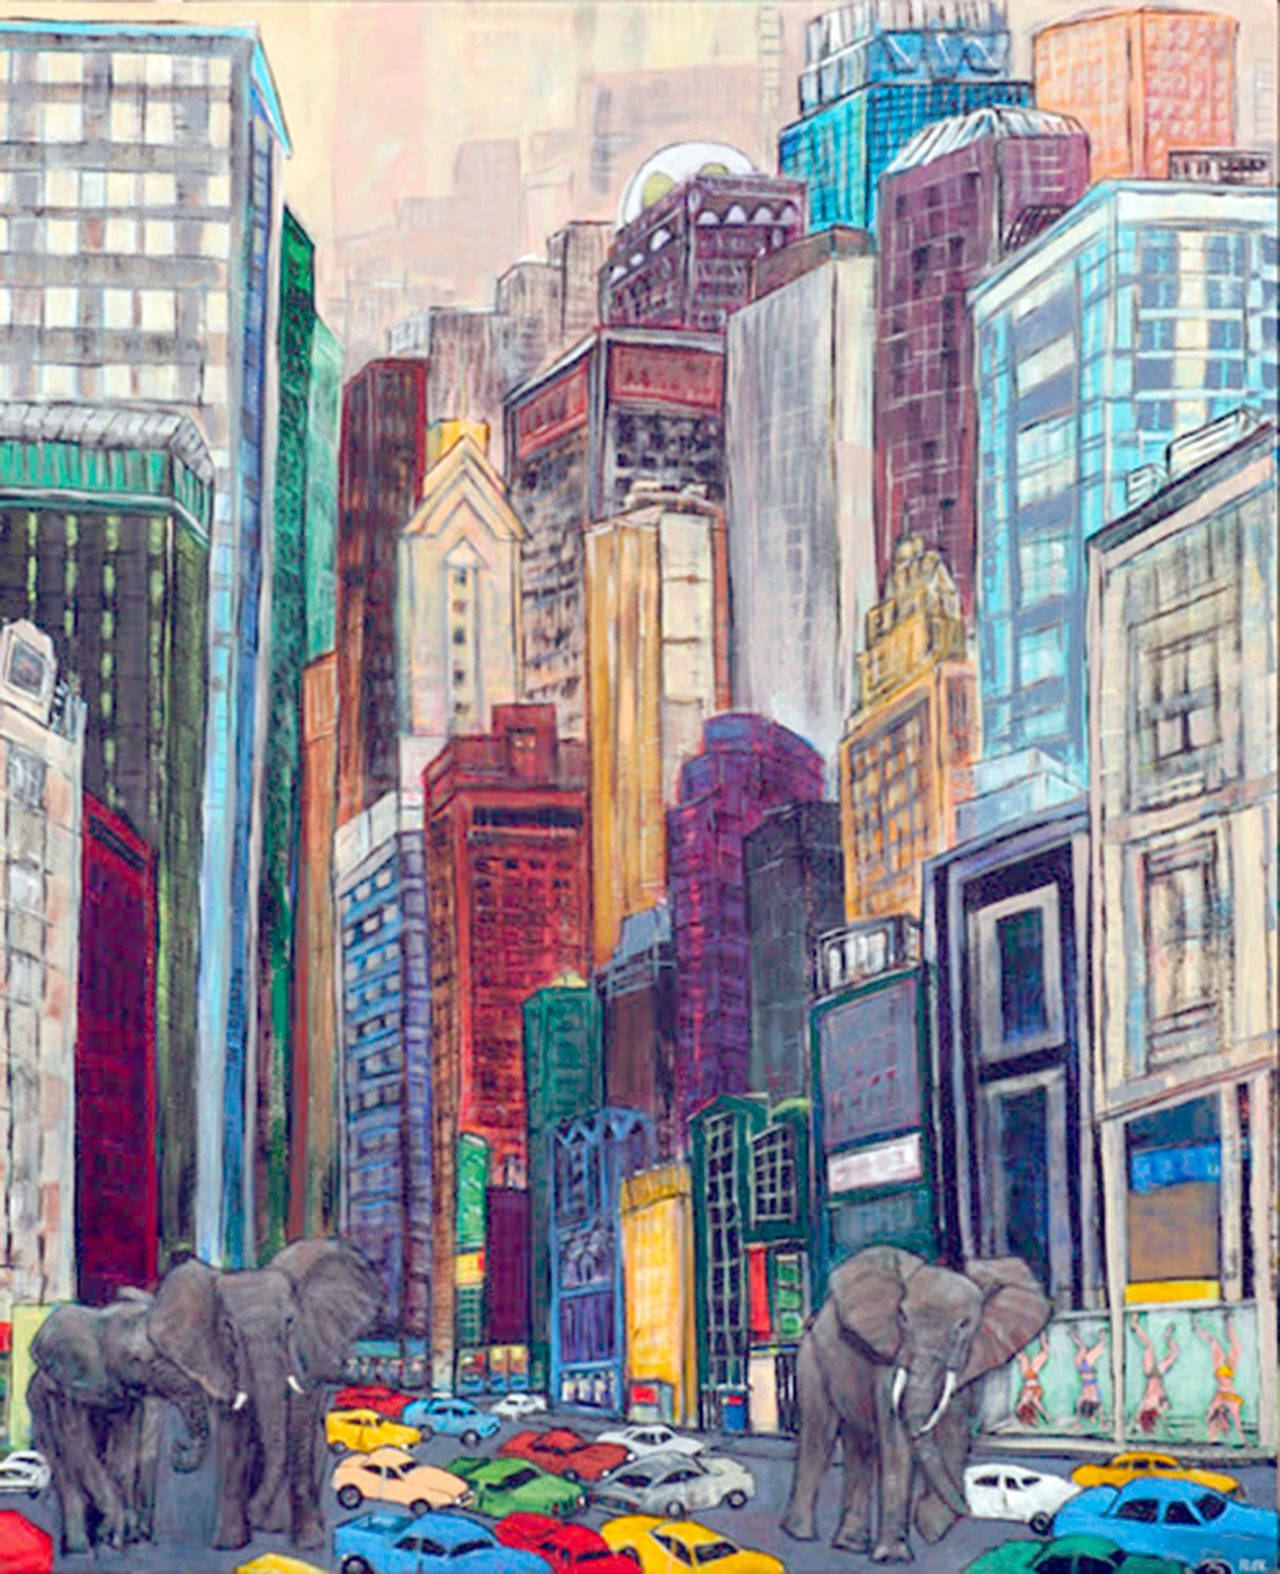 The late Lynn Rupe’s painting of elephants in a city’s downtown will be shown at Studio Bob.